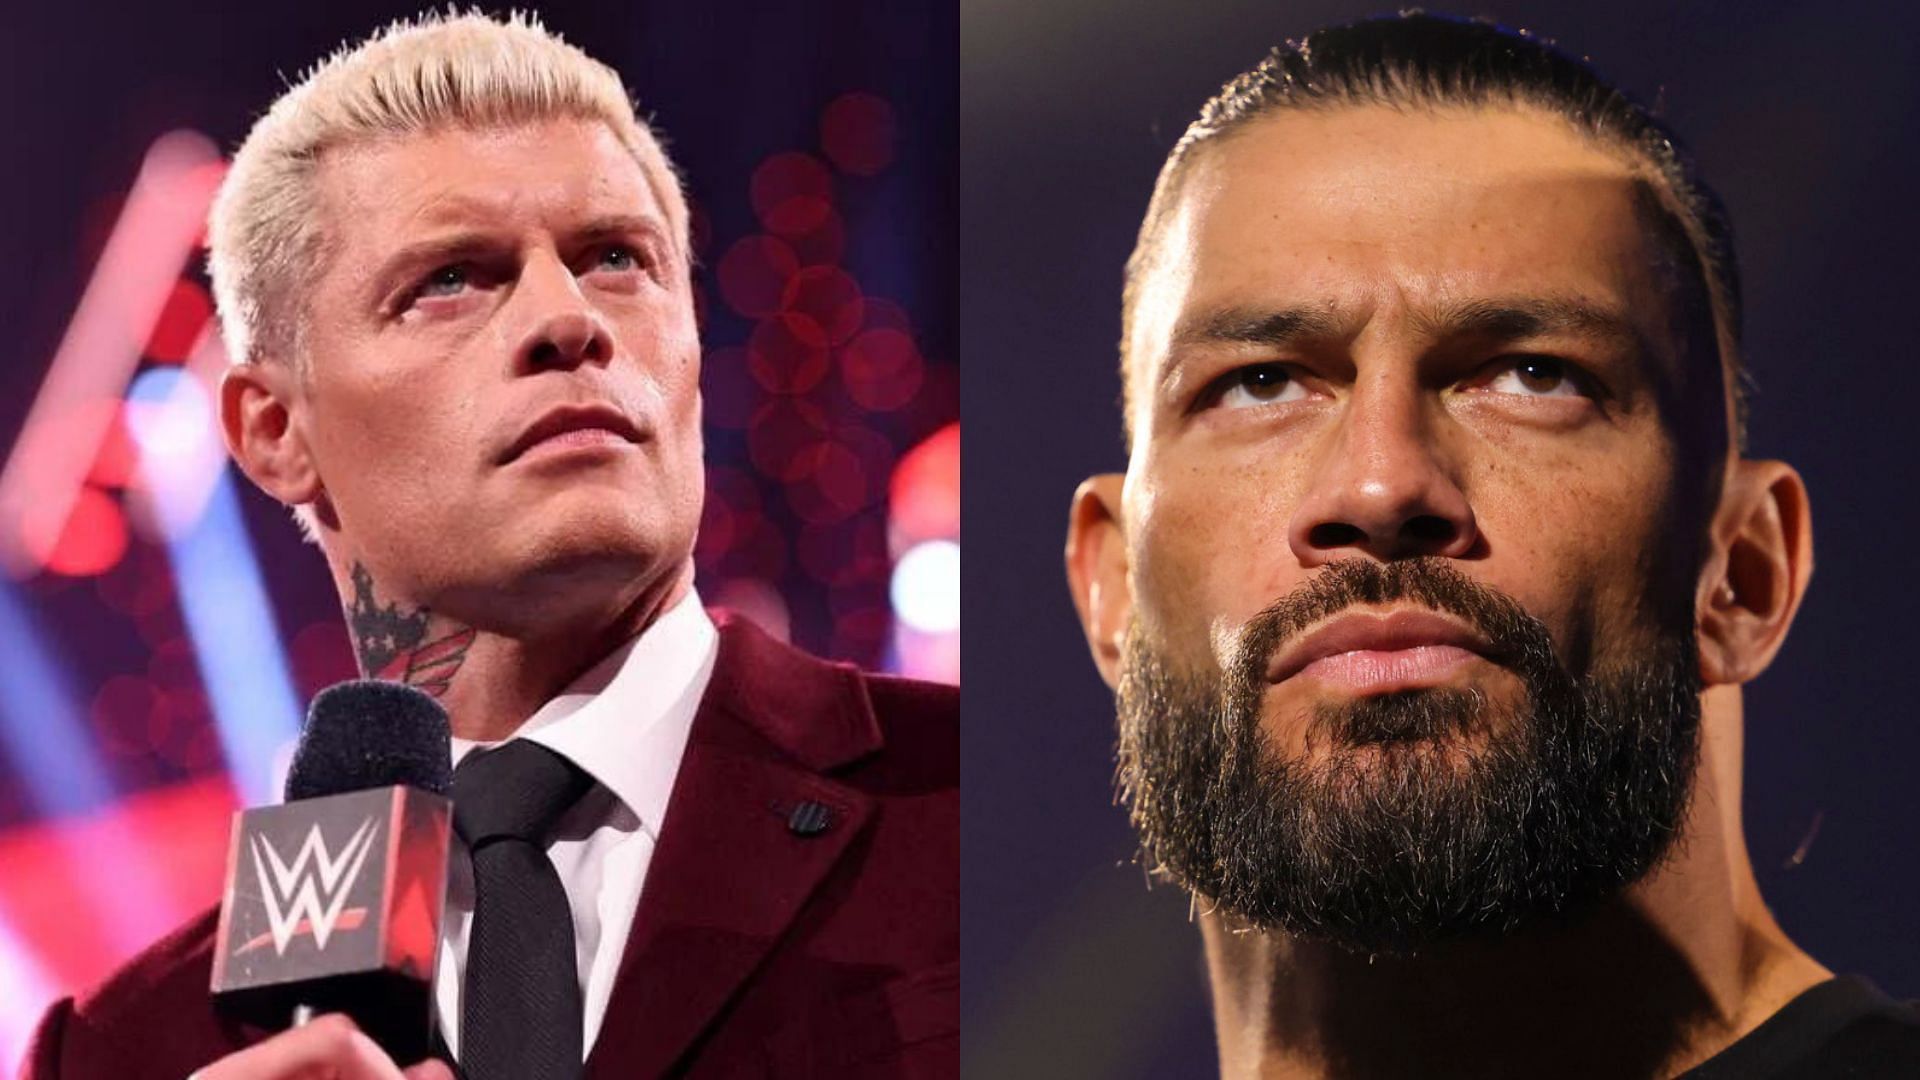 Rhodes and Reigns had an epic rivalry earlier this year.